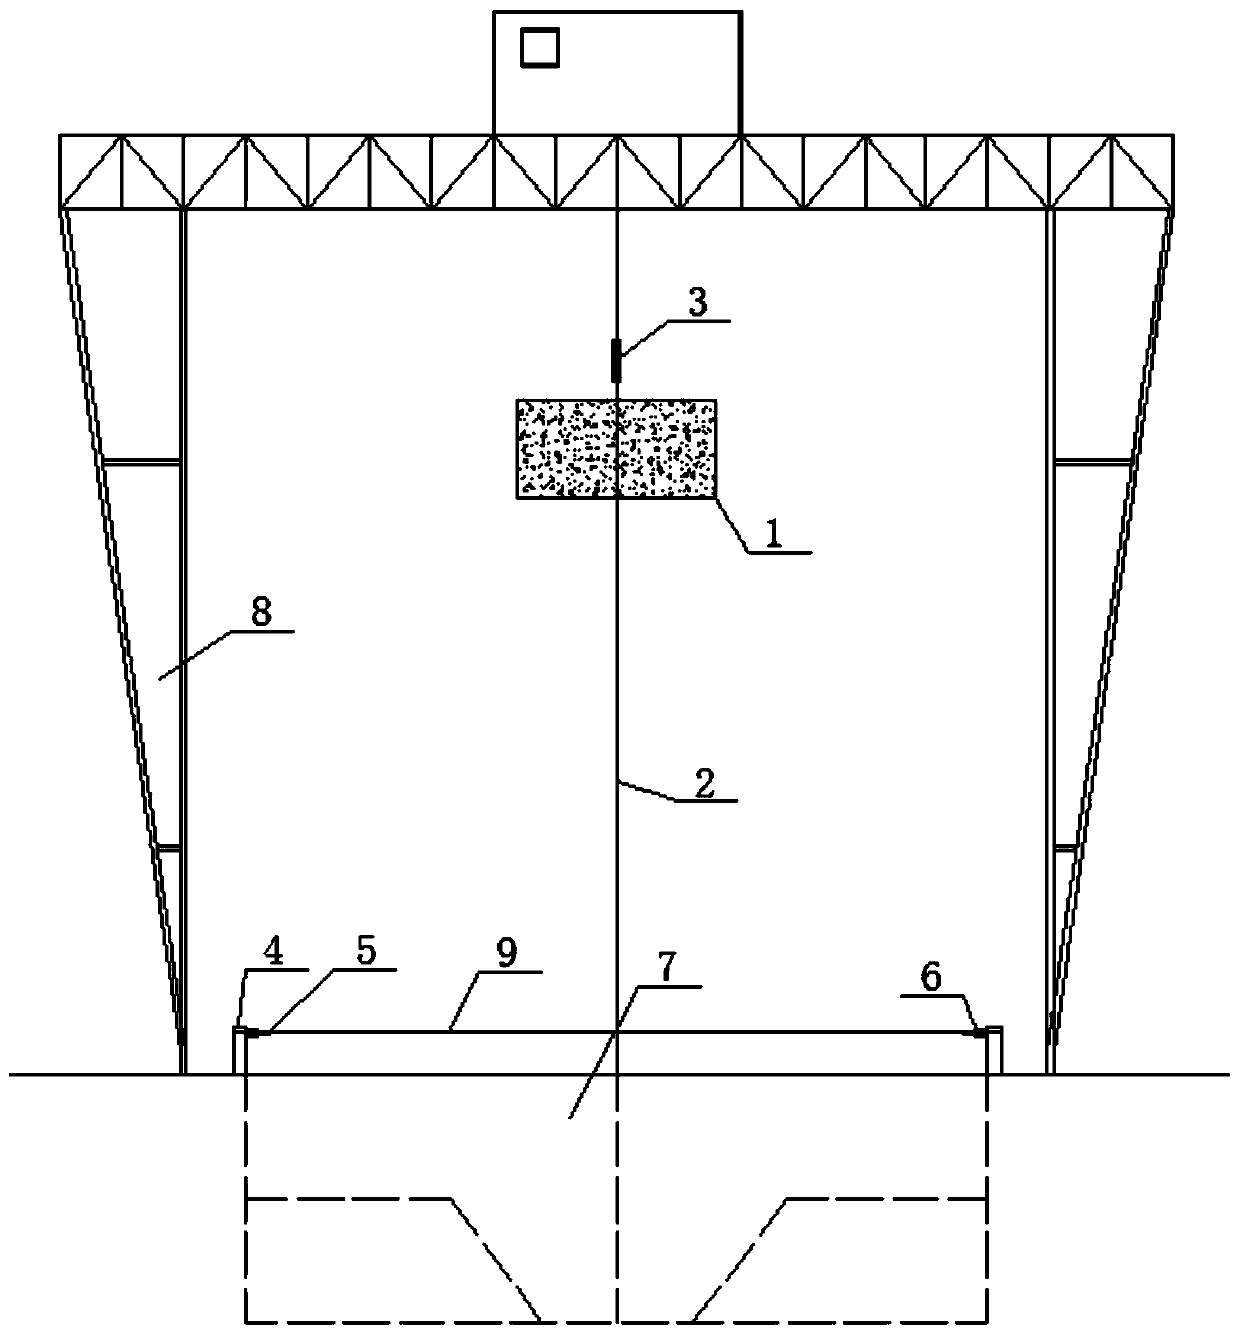 A rope-guided directional impact device for dynamic testing of energy absorbers in rockfall protection systems